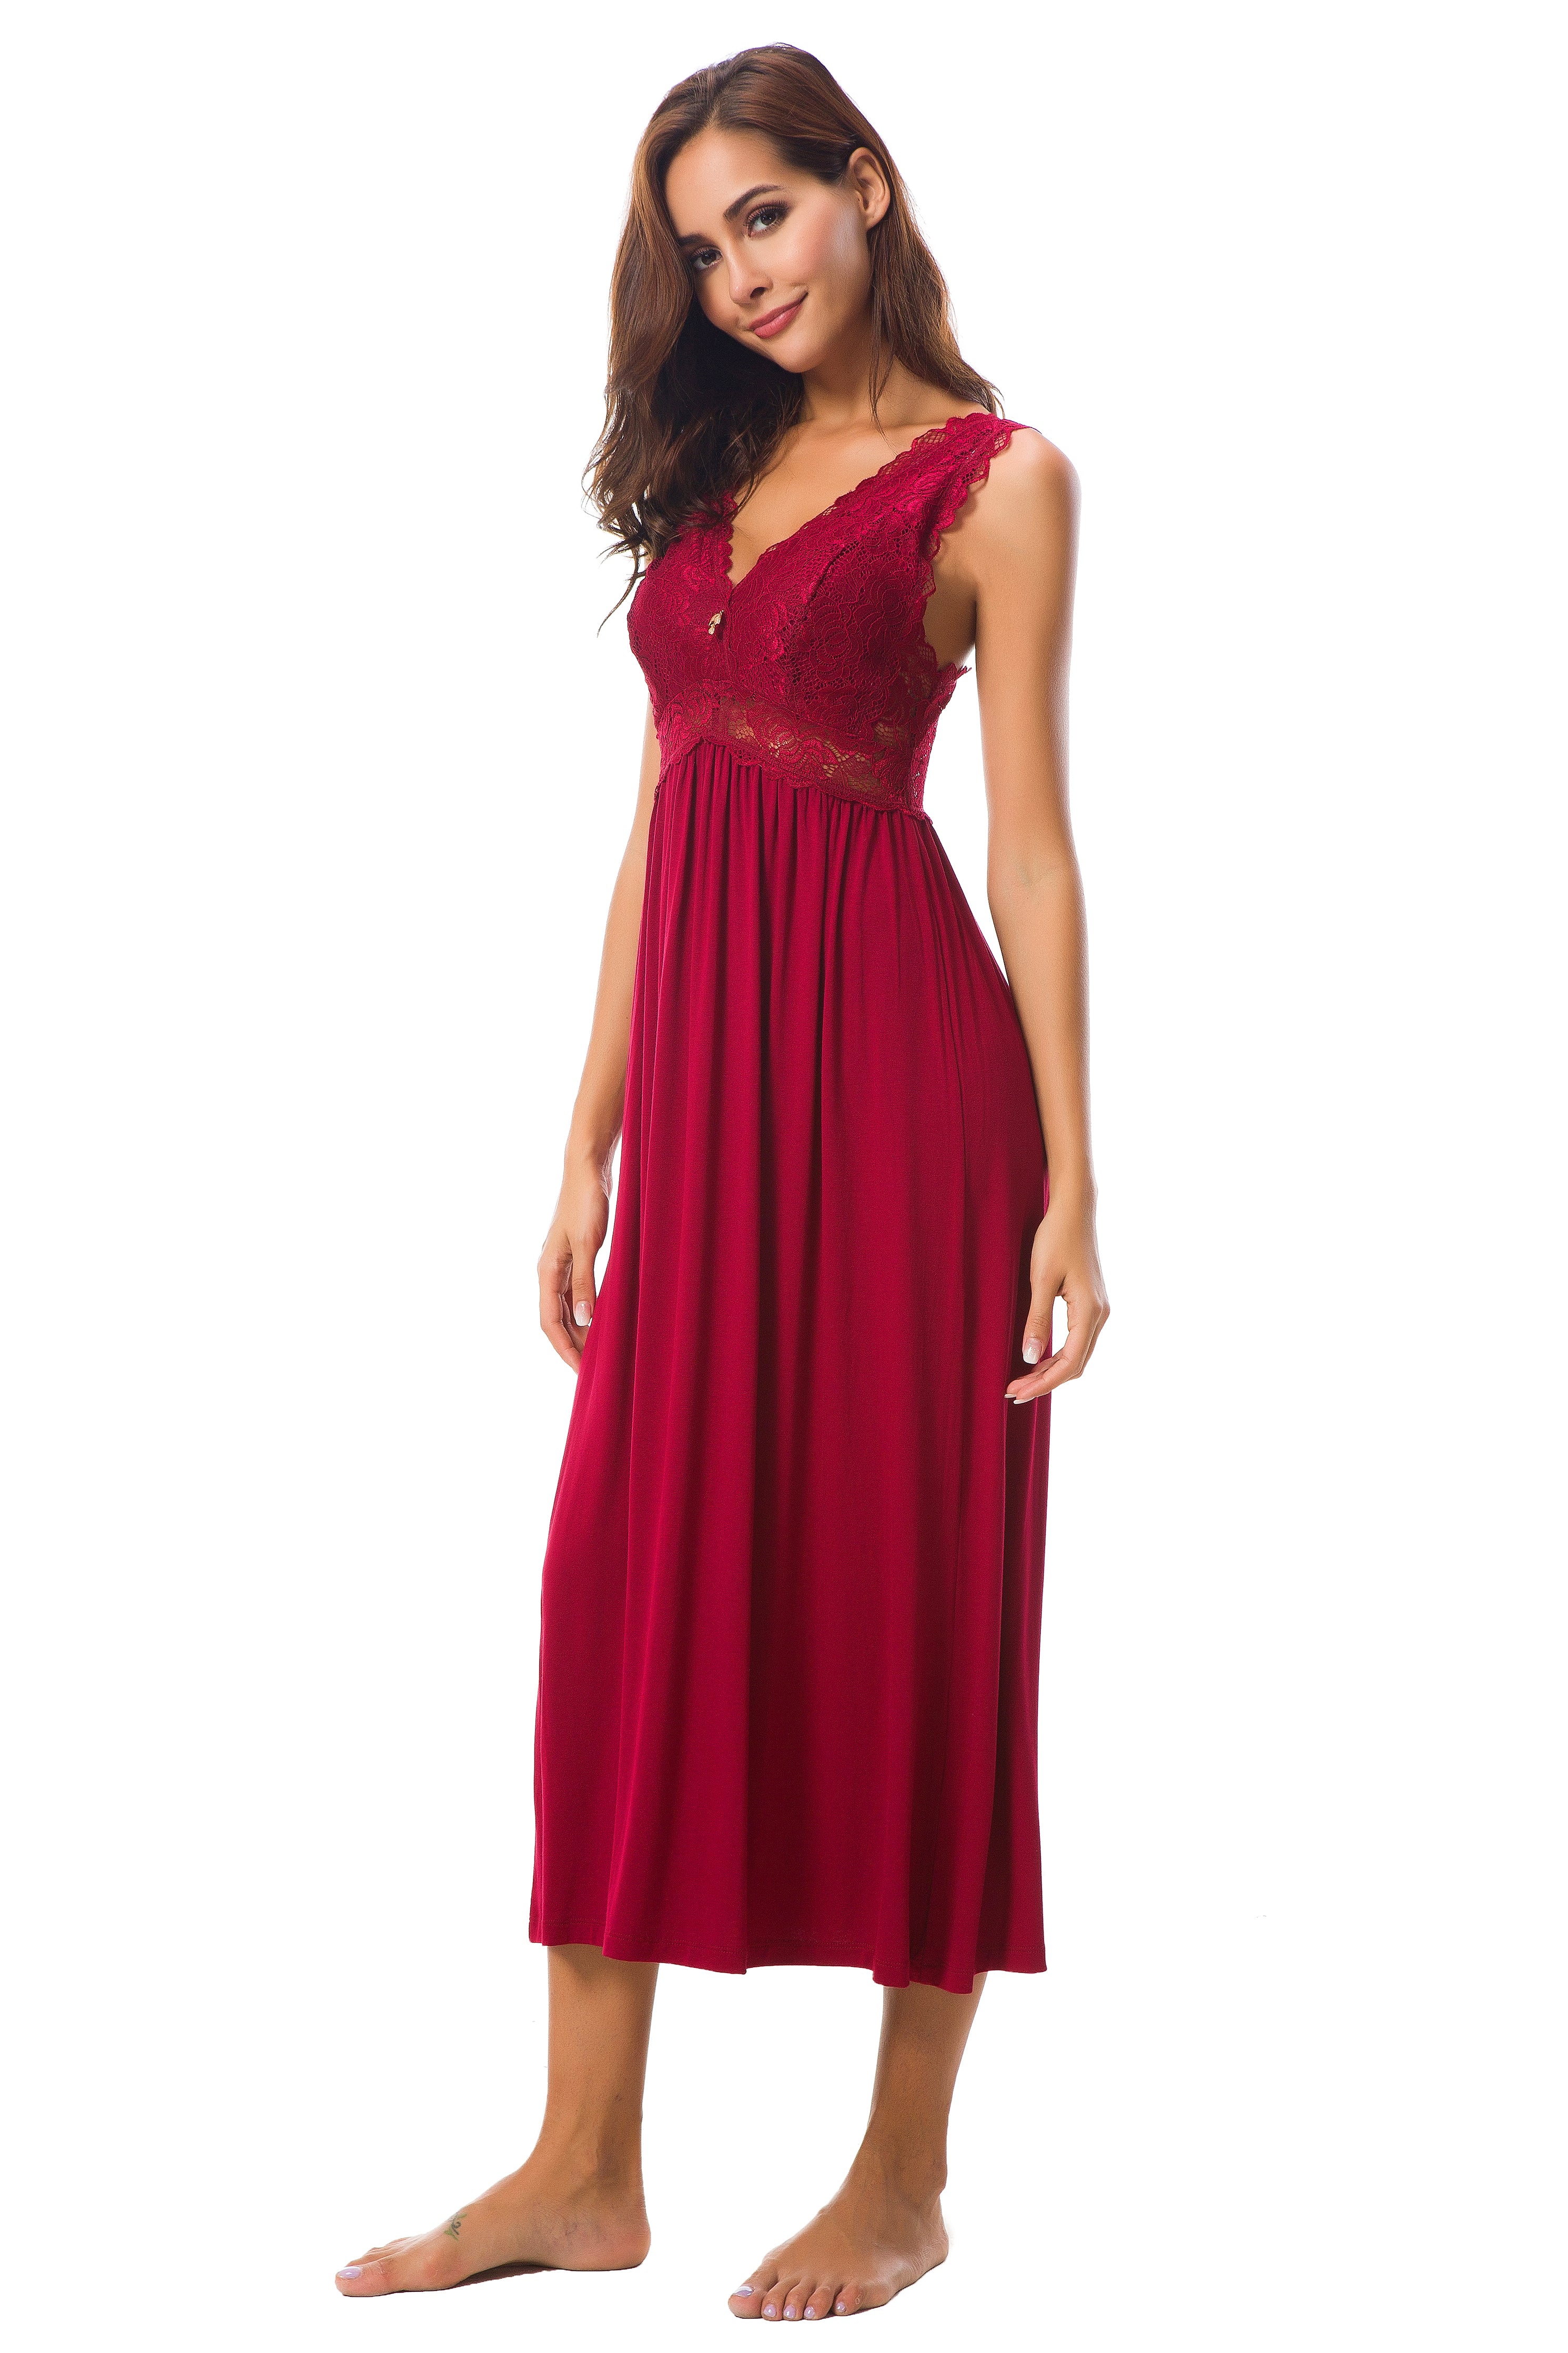 Sexy Lace Jersey Elegant Long Nightgown Chemises Wine